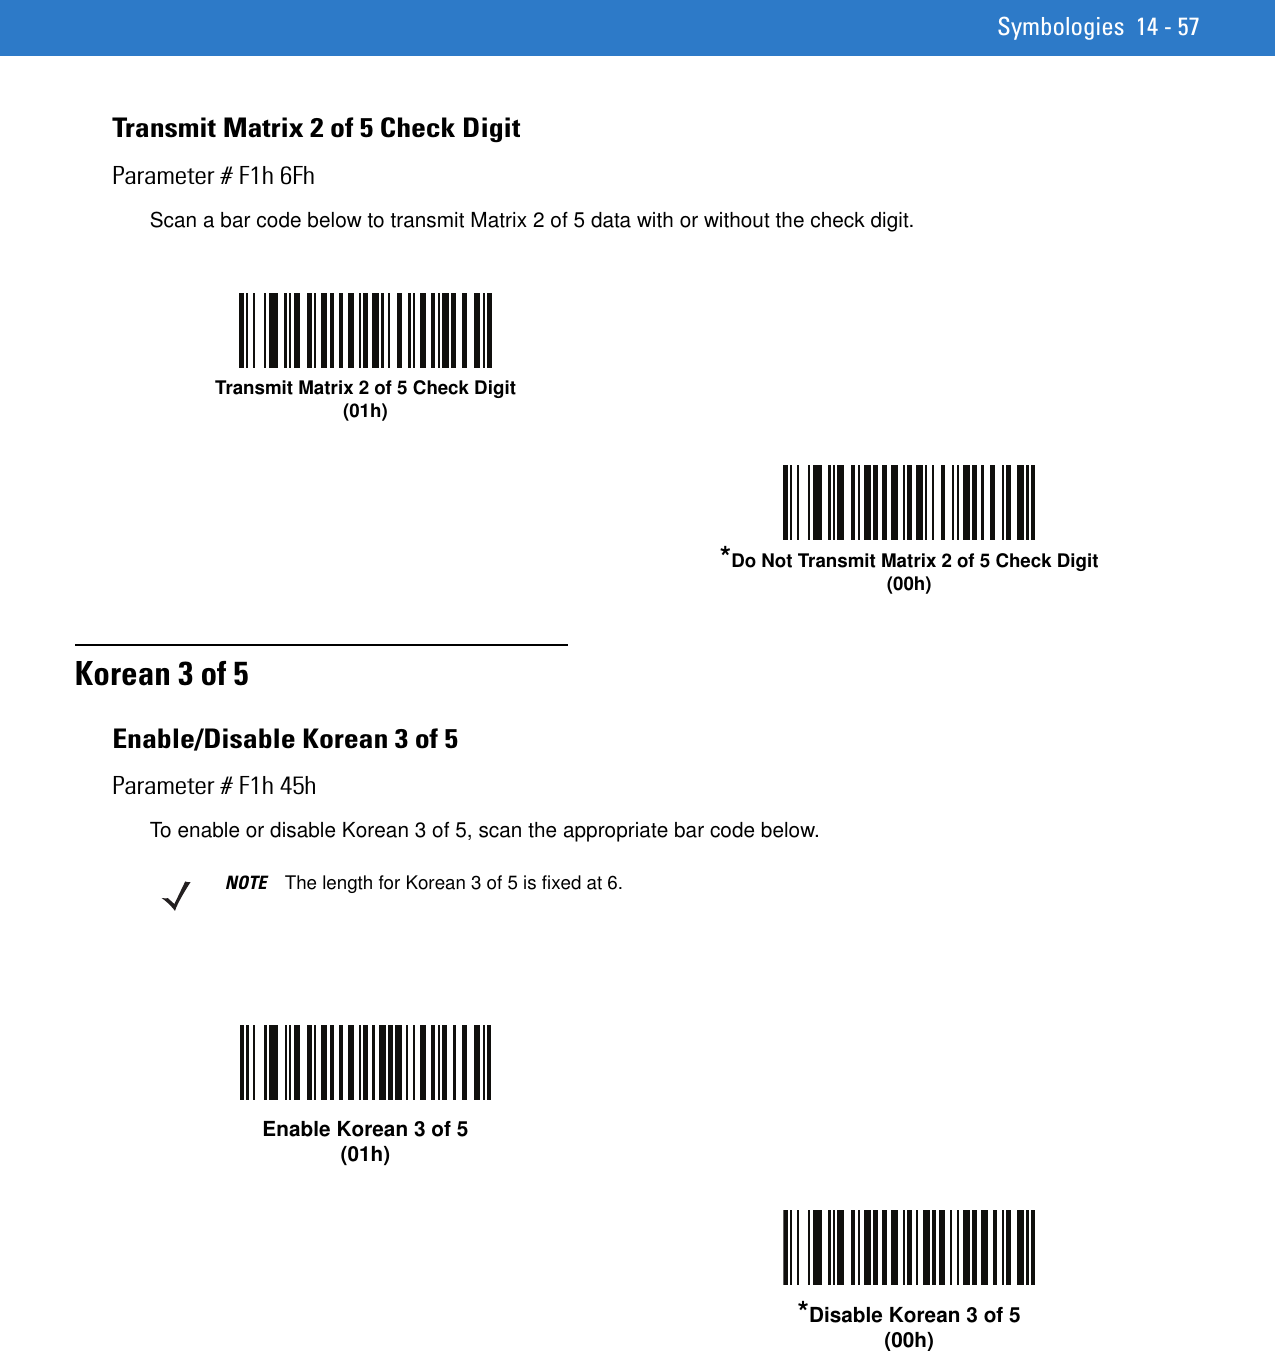 Symbologies 14 - 57Transmit Matrix 2 of 5 Check DigitParameter # F1h 6FhScan a bar code below to transmit Matrix 2 of 5 data with or without the check digit.Korean 3 of 5Enable/Disable Korean 3 of 5Parameter # F1h 45hTo enable or disable Korean 3 of 5, scan the appropriate bar code below.Transmit Matrix 2 of 5 Check Digit(01h)*Do Not Transmit Matrix 2 of 5 Check Digit(00h)NOTE The length for Korean 3 of 5 is fixed at 6.Enable Korean 3 of 5 (01h)*Disable Korean 3 of 5 (00h)